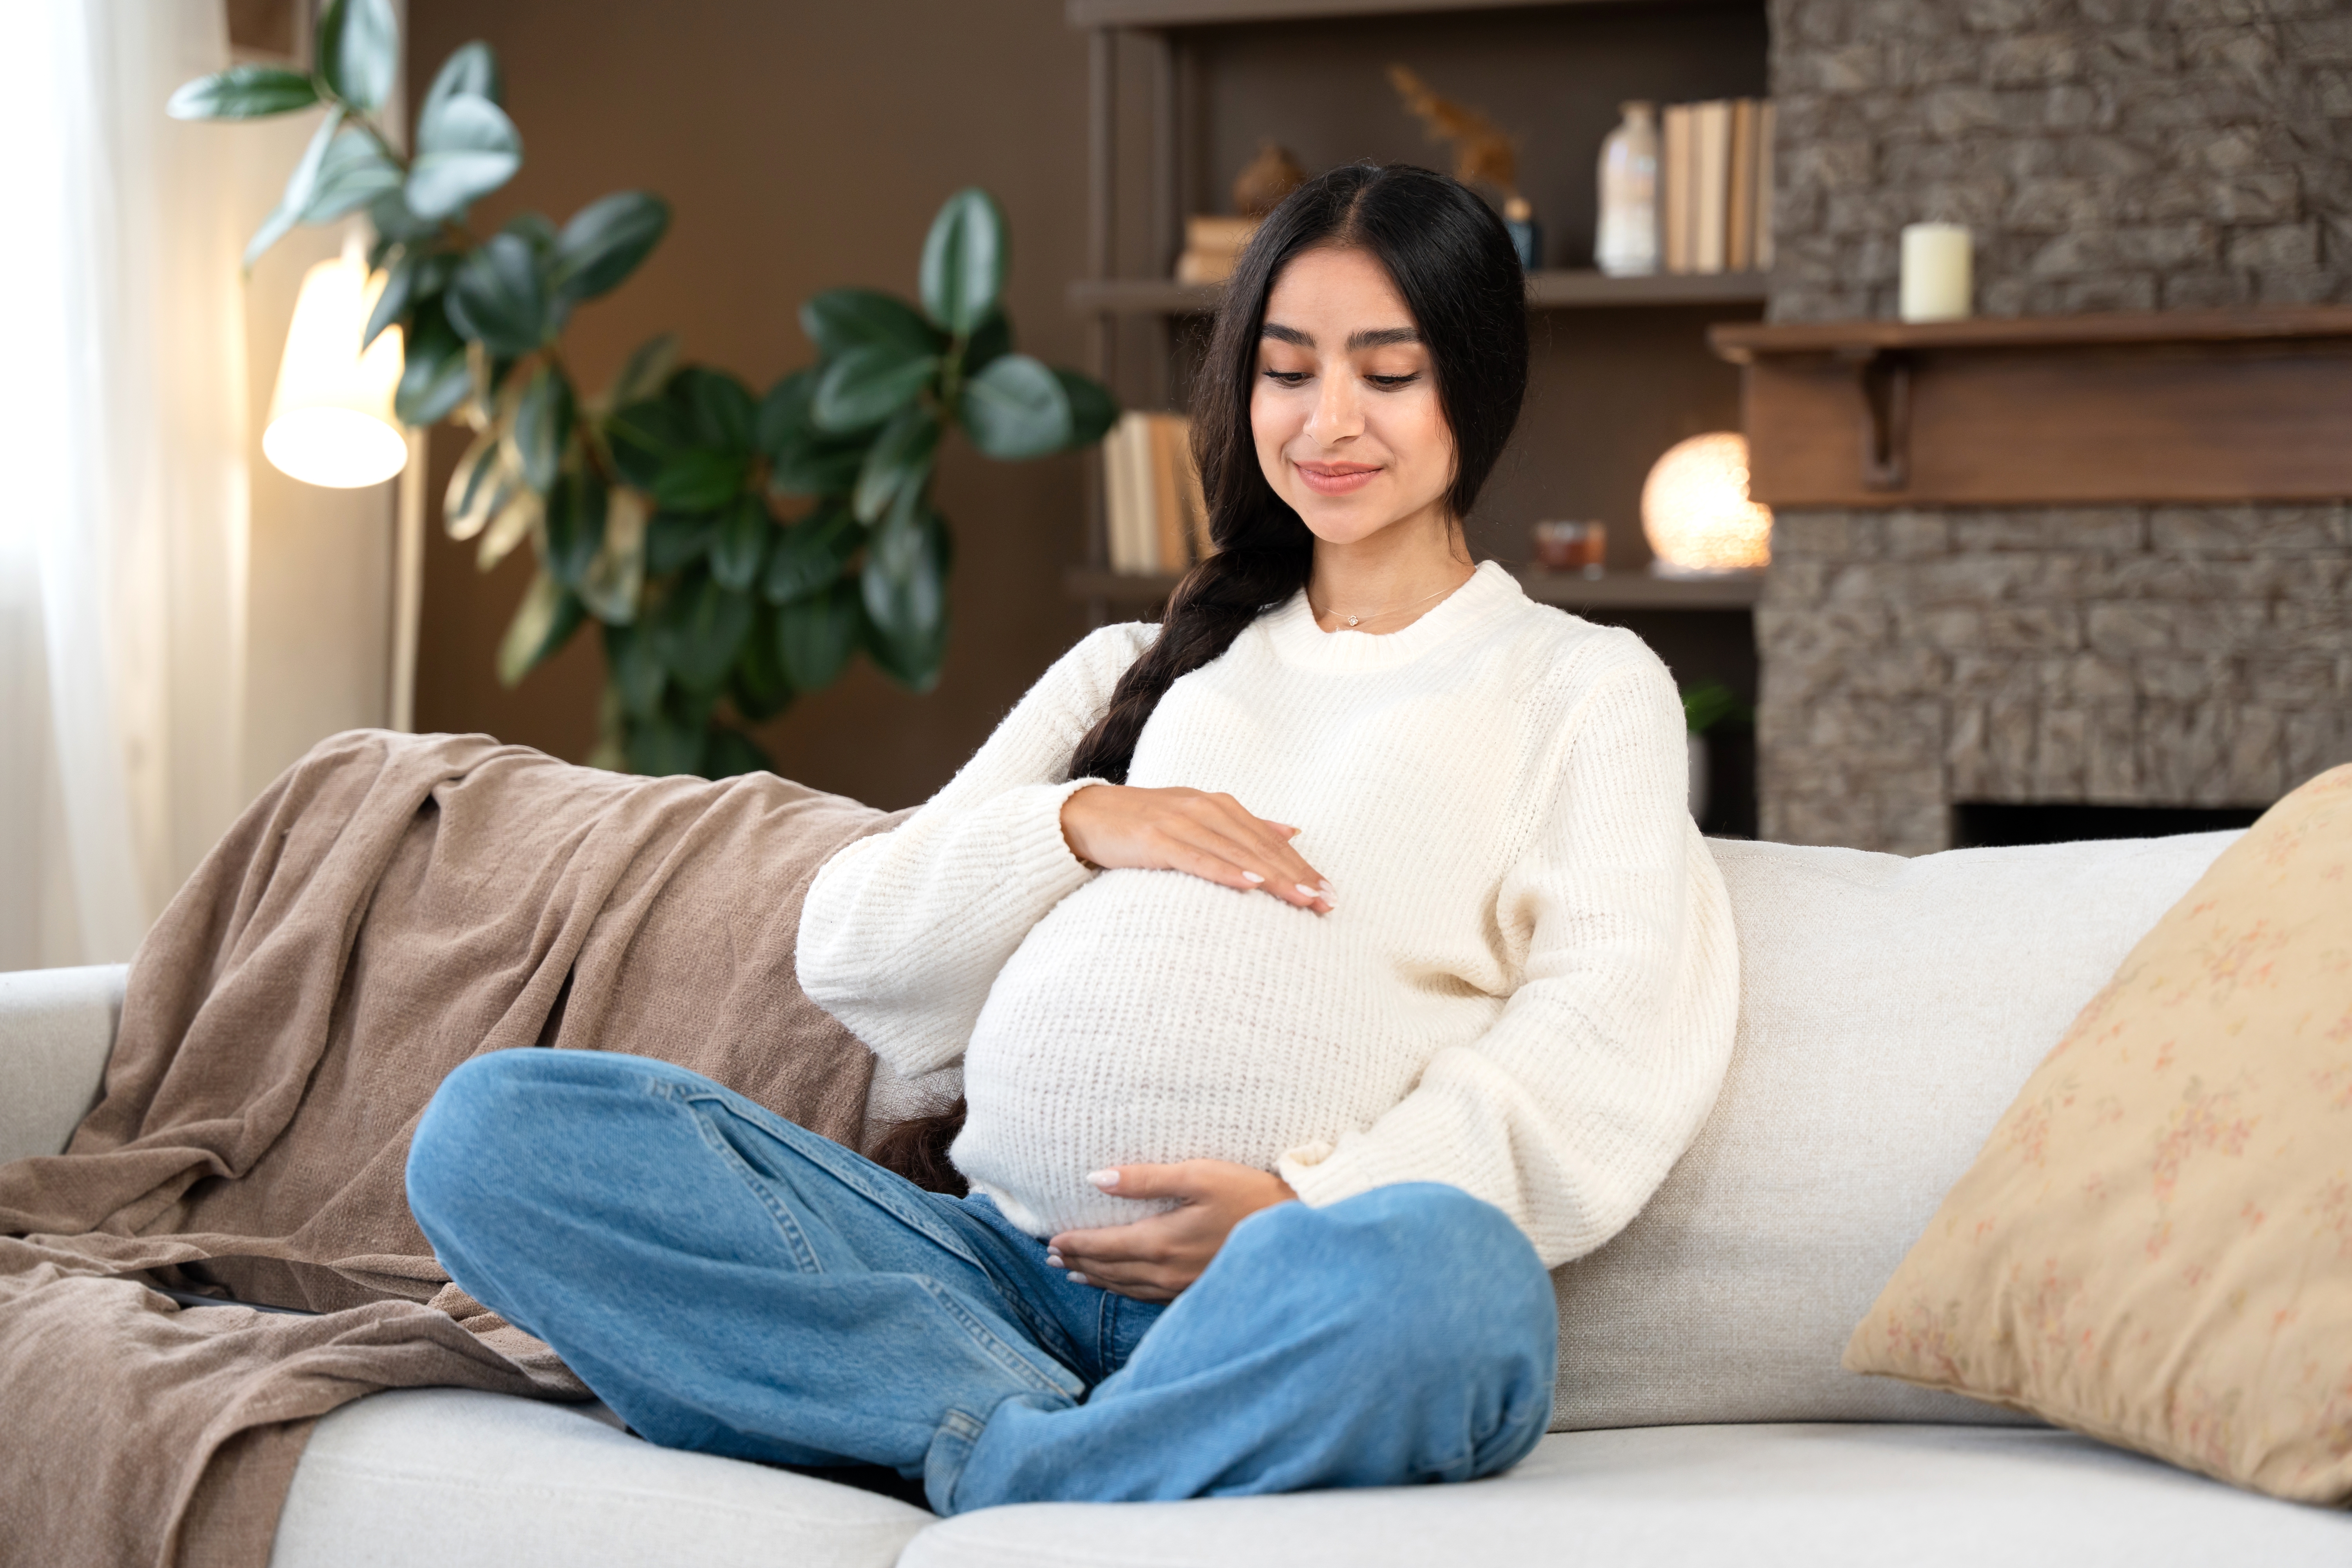 Common Pregnancy Discomforts and How to Alleviate Them